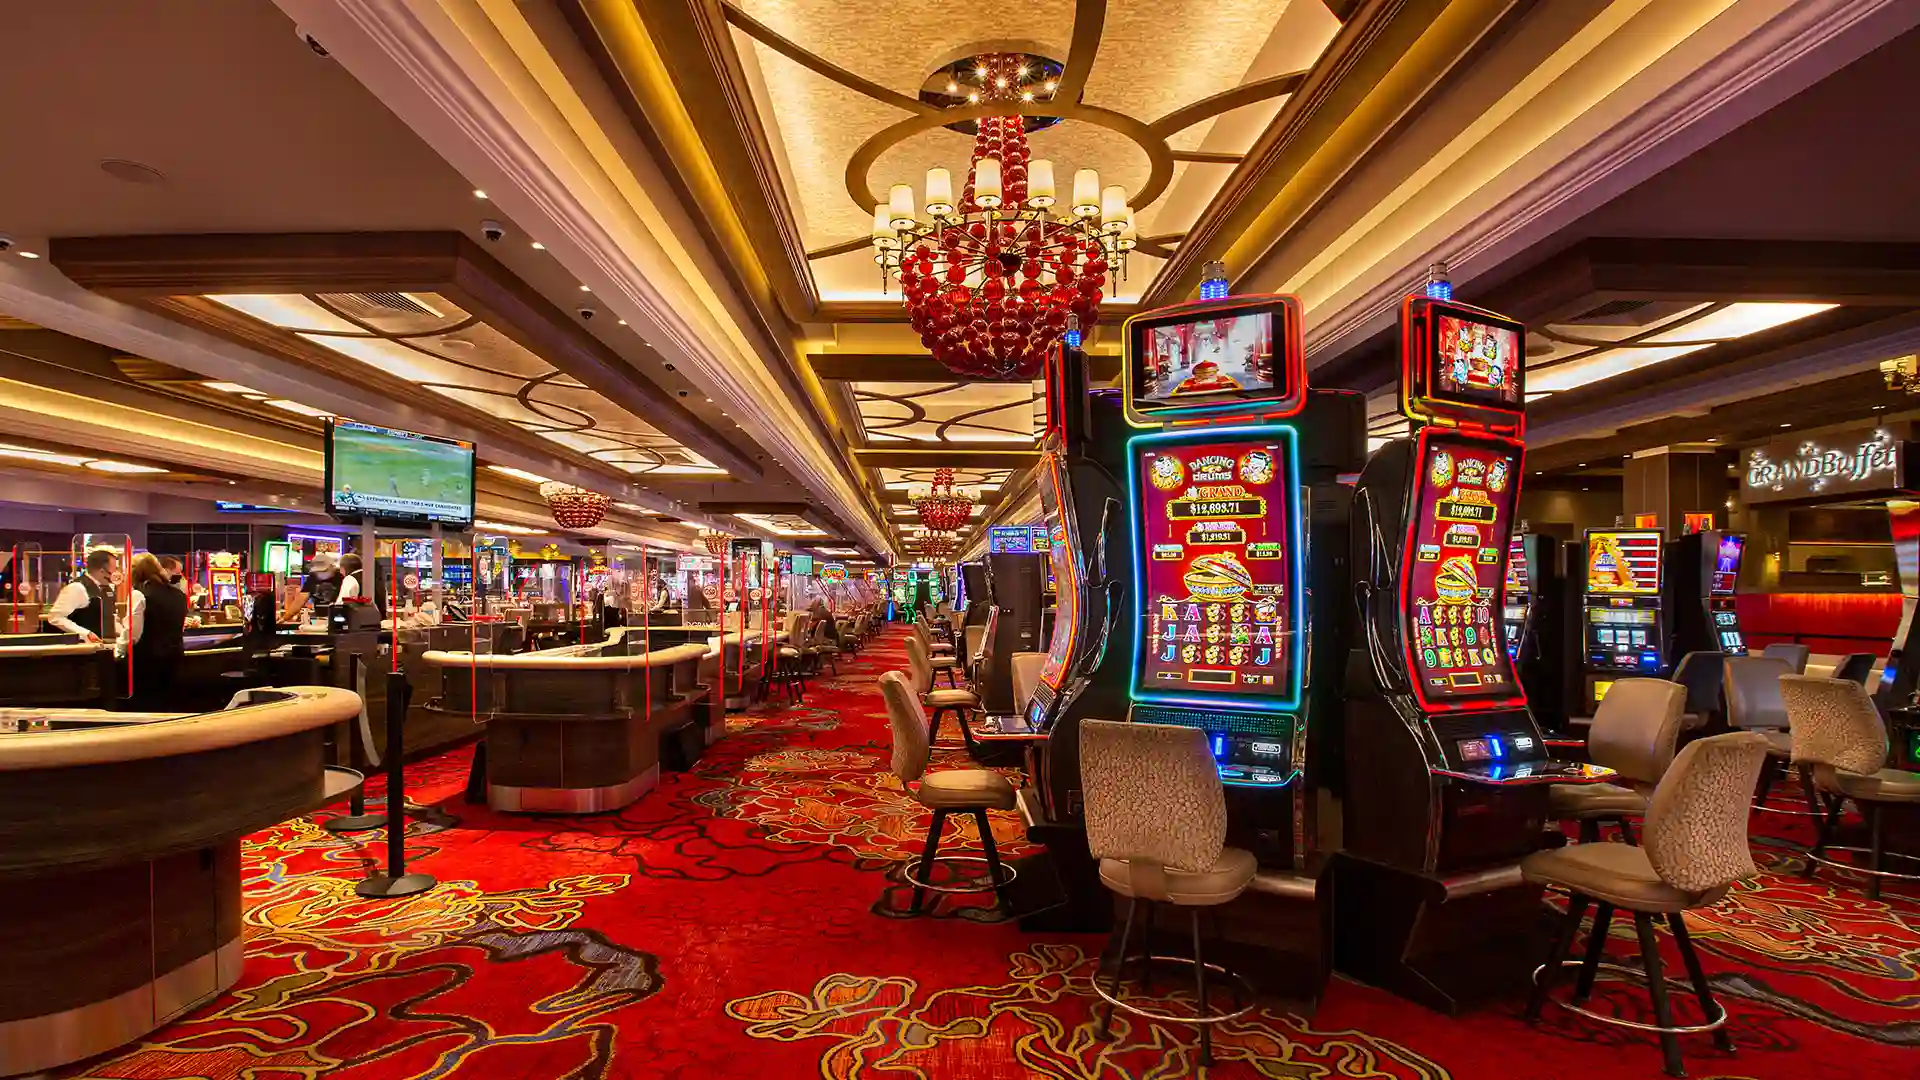 Casinos with a Selection of Games Are Almost Universally Available